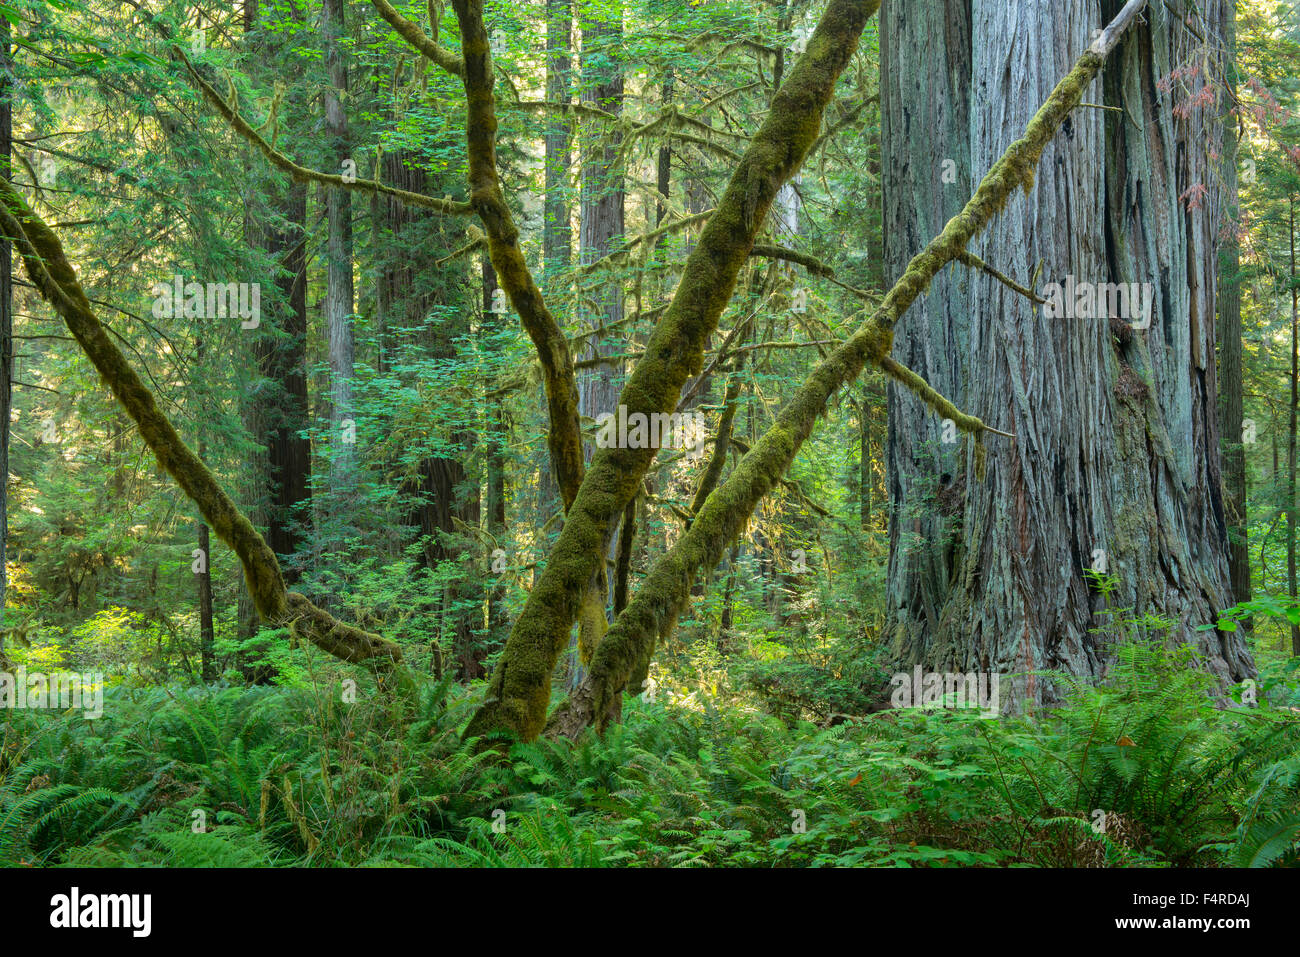 USA, UnitedStates, America, California, West Coast, redwood, forest, Prairie Creek Redwoods, State Park, forest, mossy, green, n Stock Photo